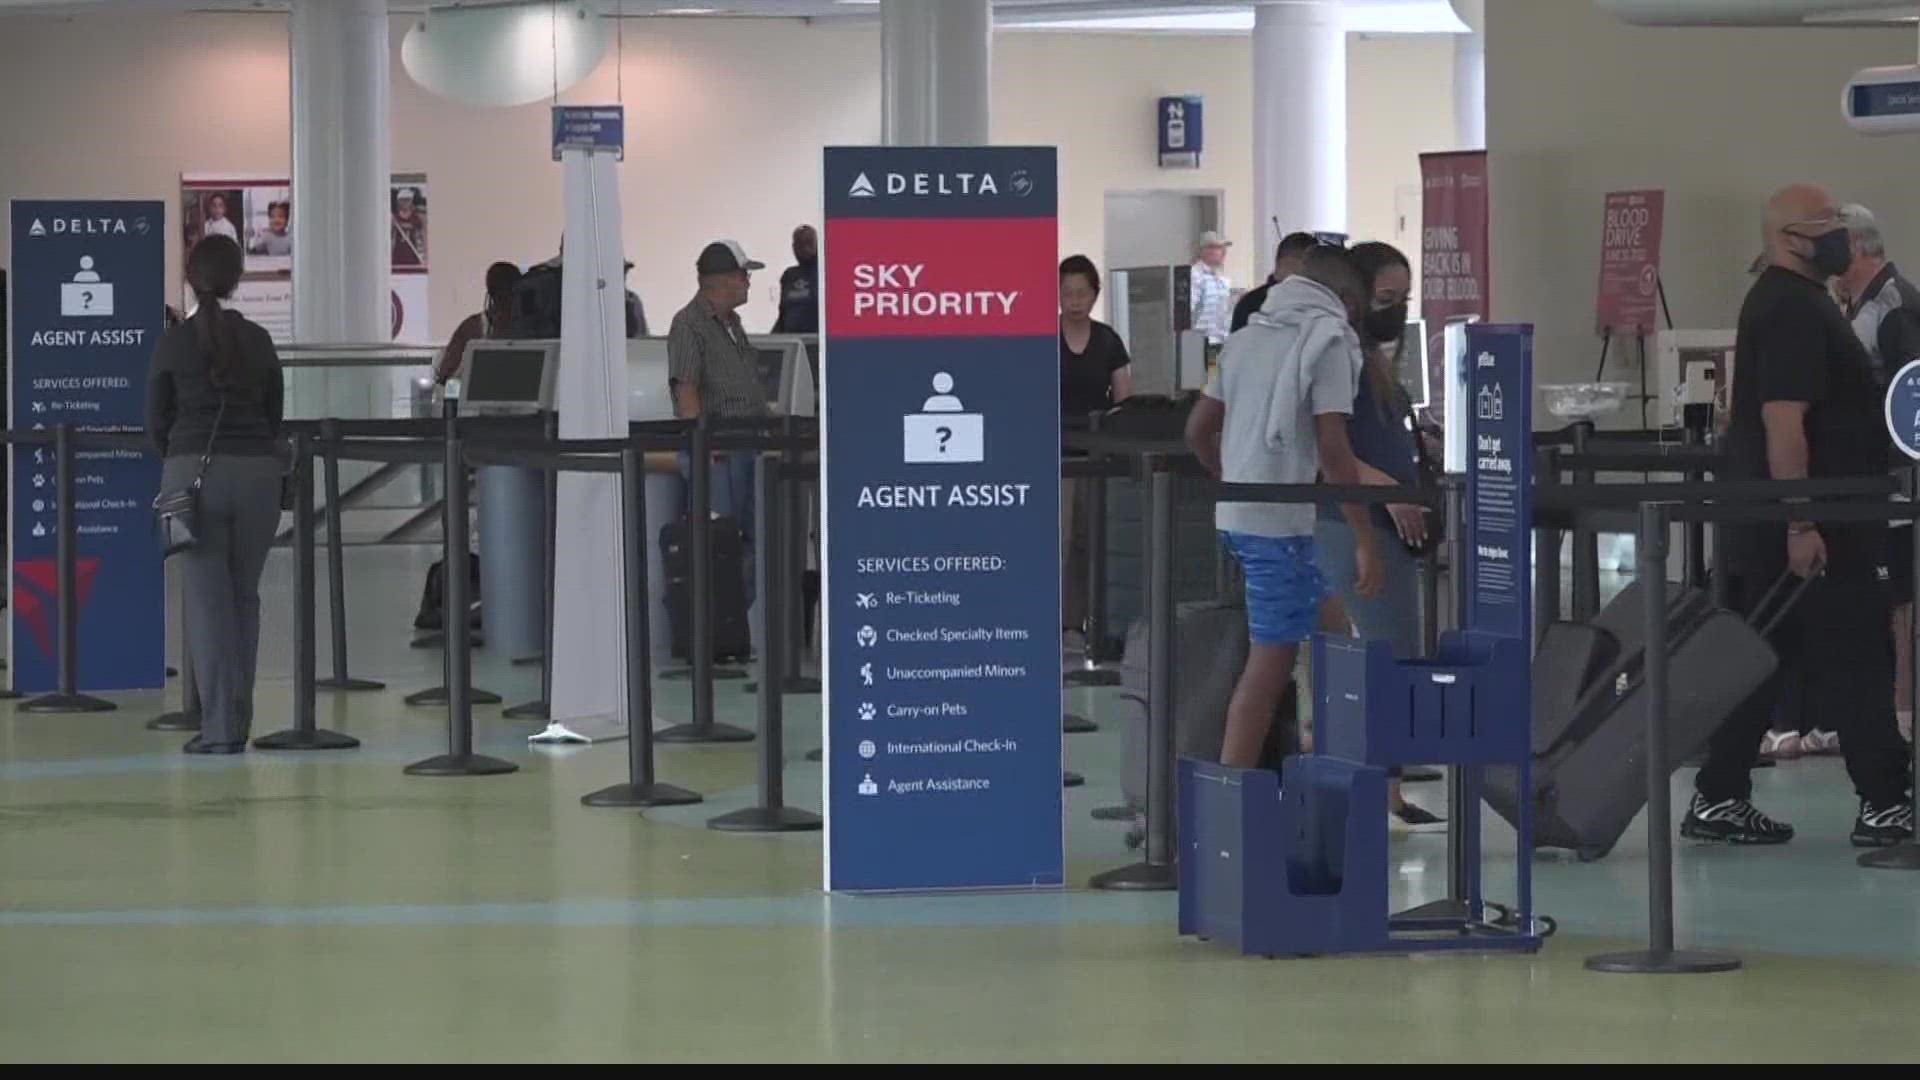 JIA is not witnessing near as many cancelations as other airports in the country, officials said.